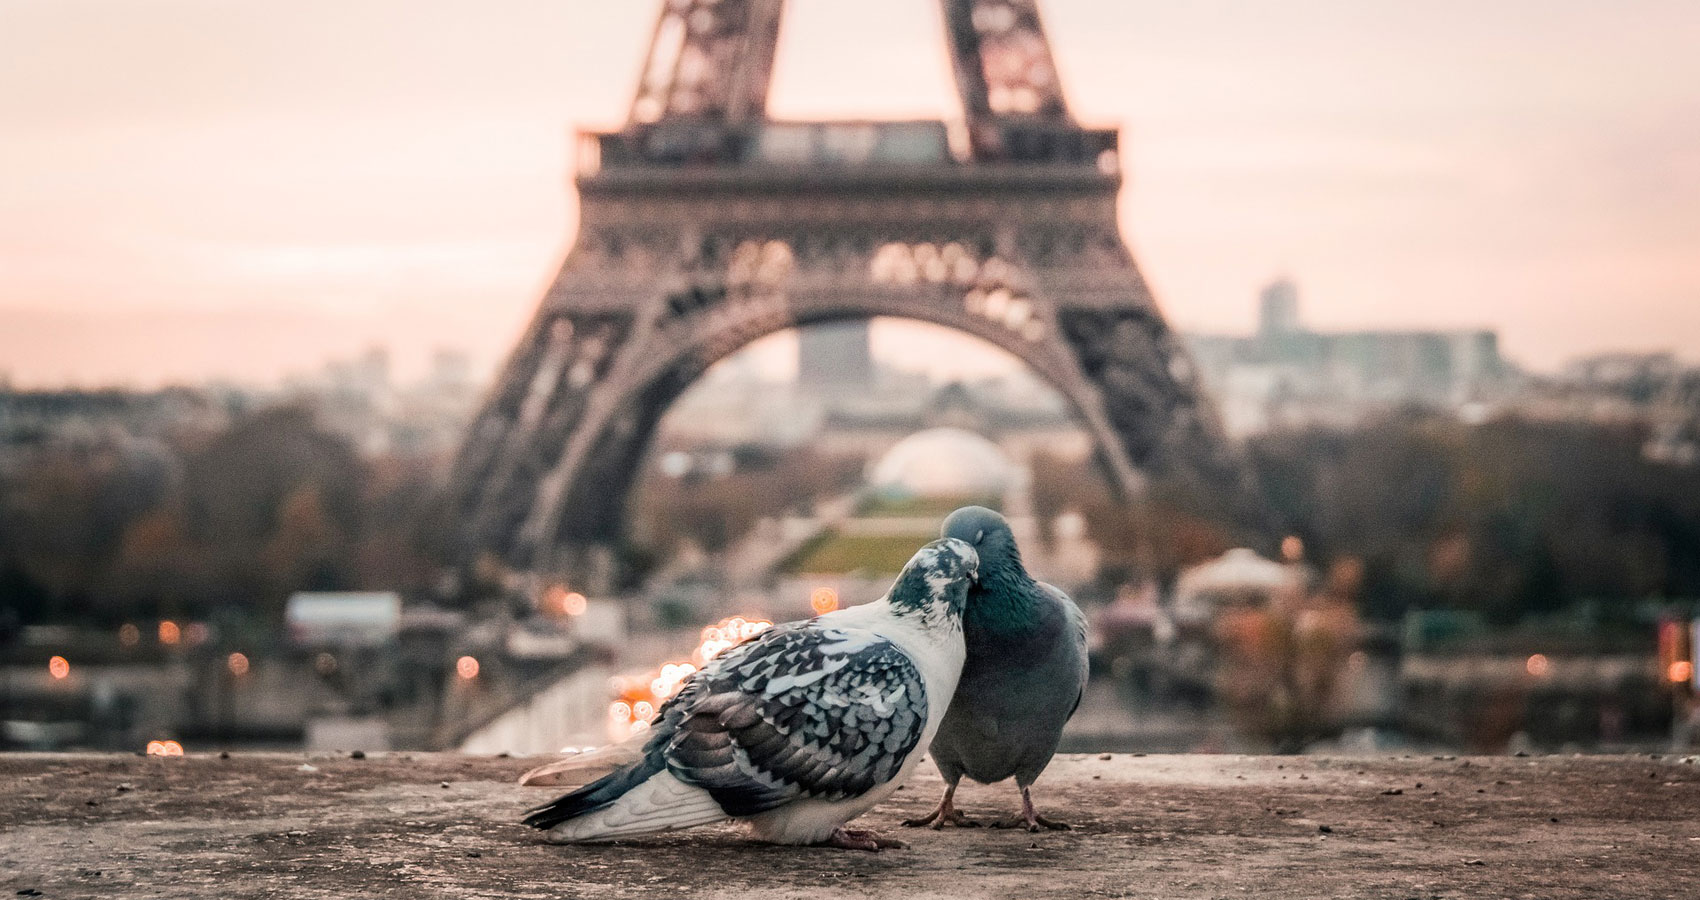 This Is Paris, a poem written by Barbara Deraoui at Spillwords.com